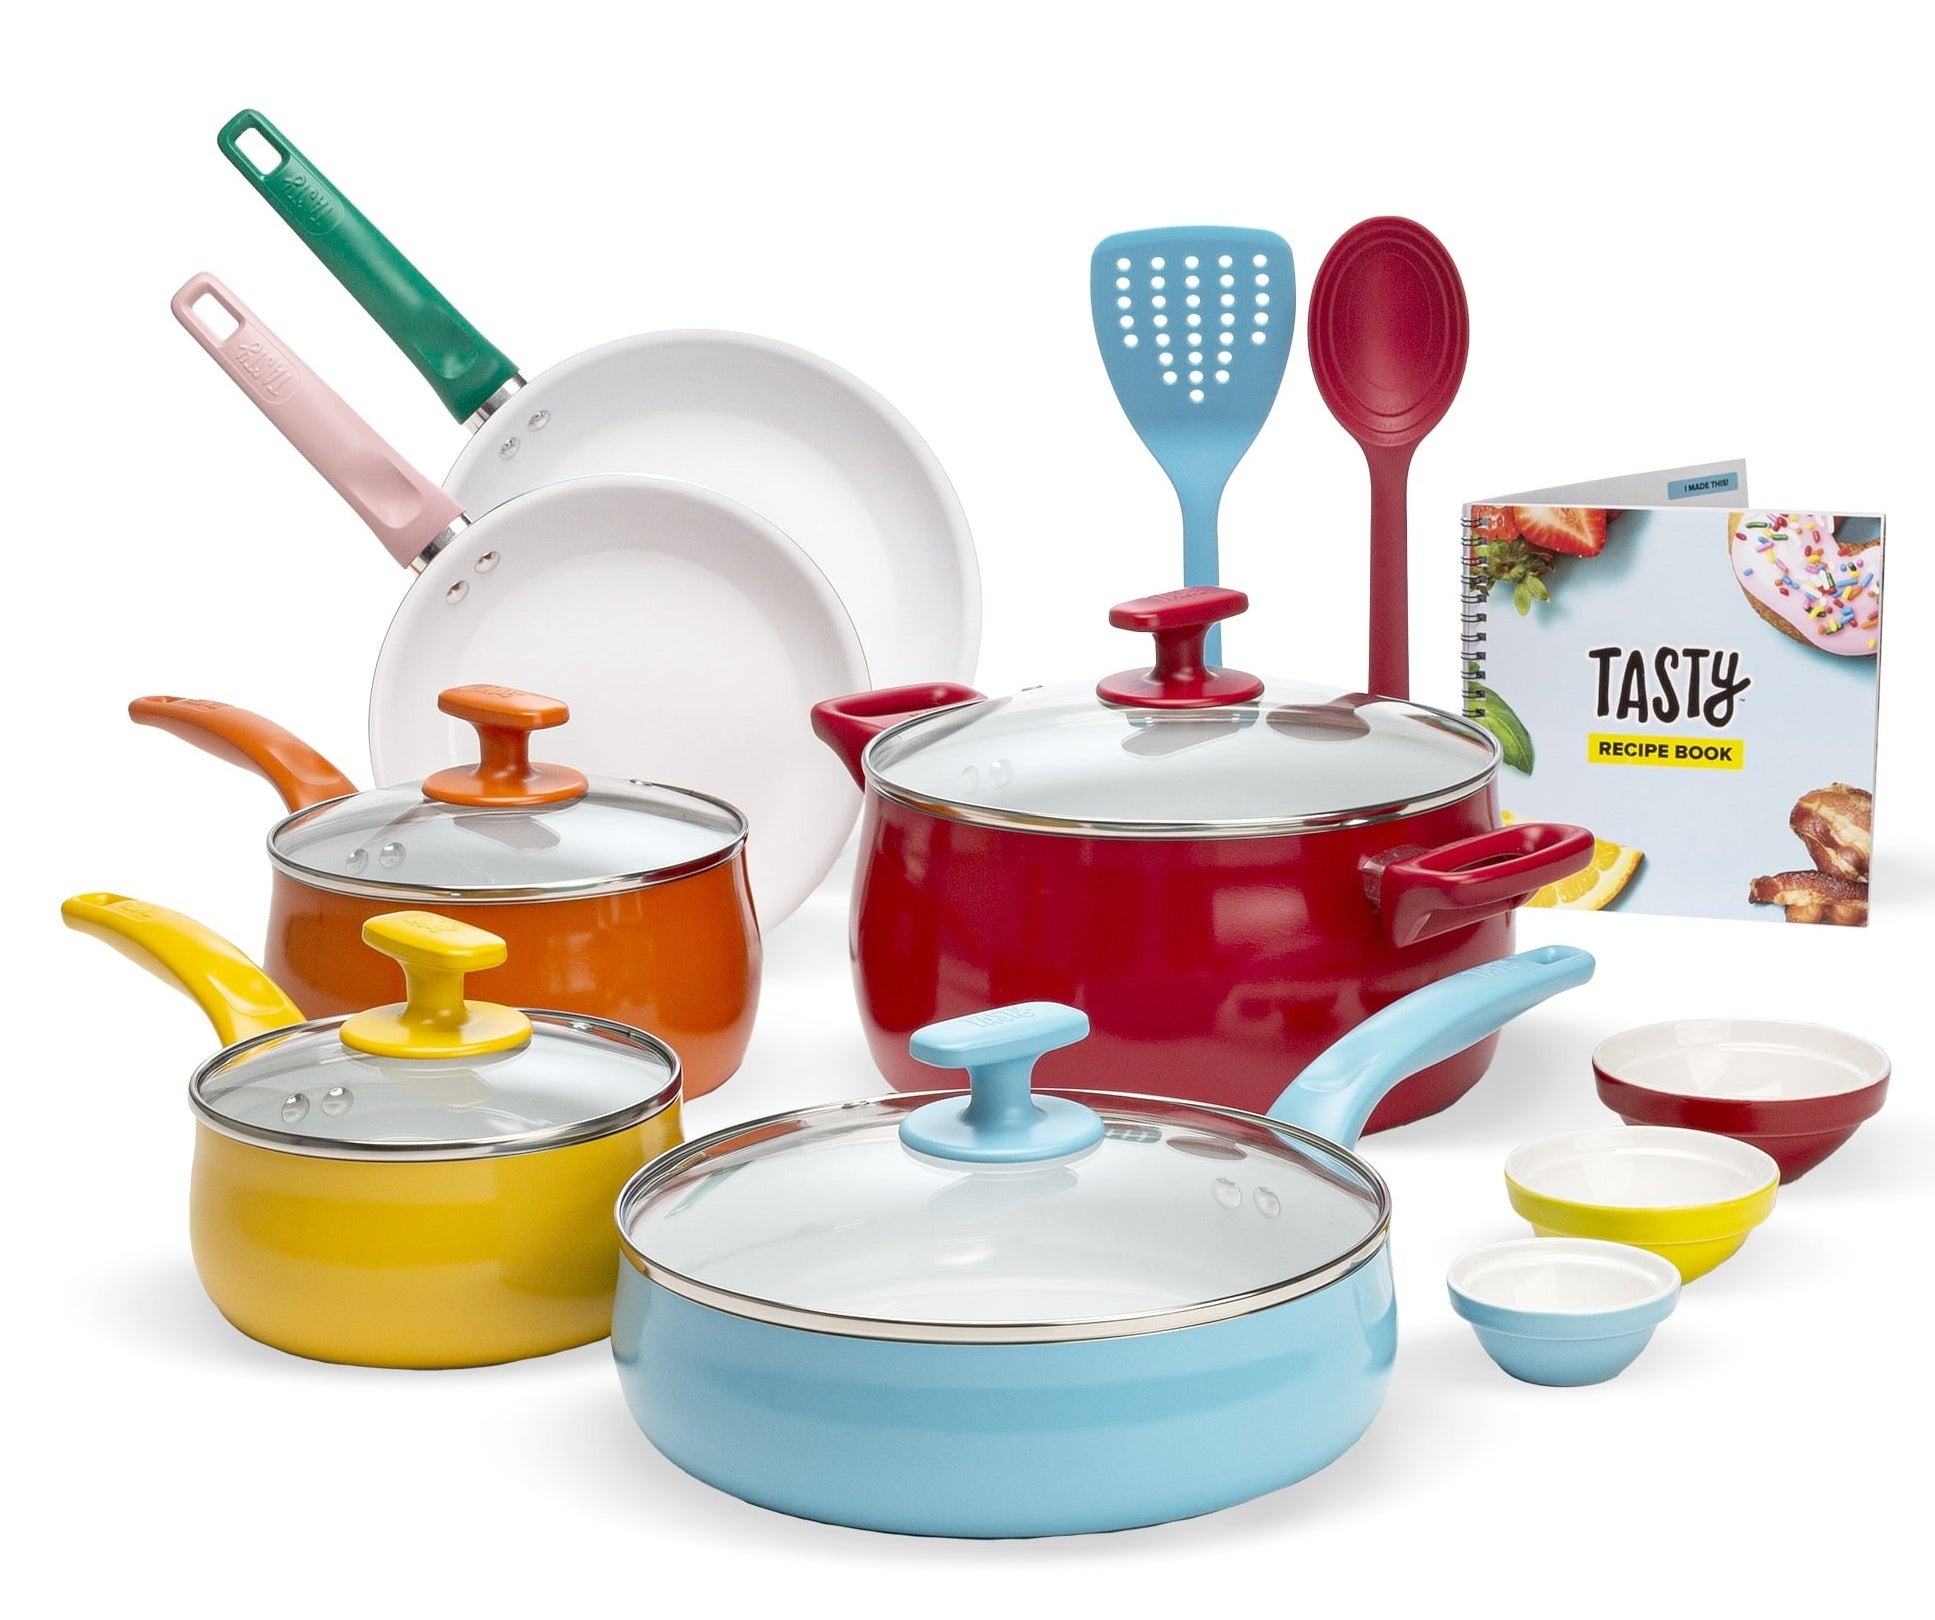 Image of multicolored cookware set